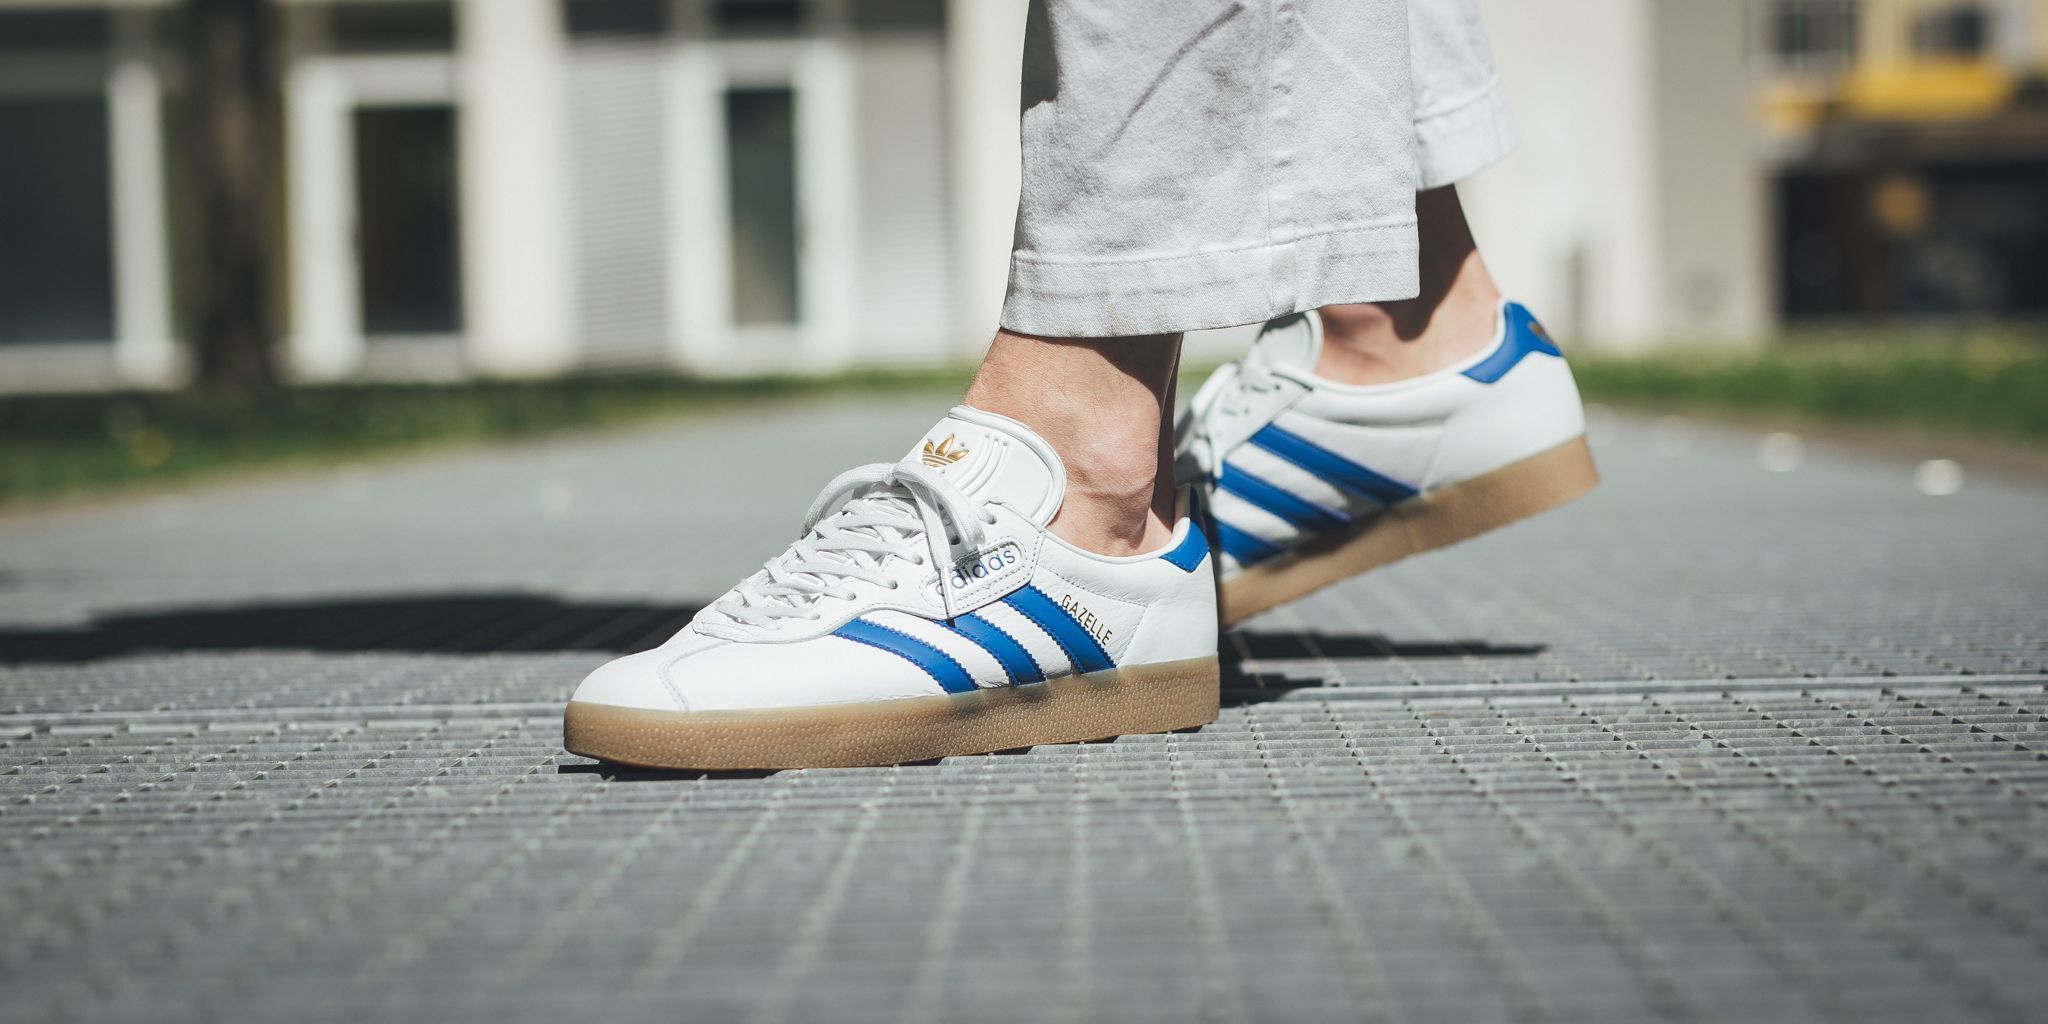 Titolo on Twitter: "available now ❗️ Adidas Gazelle Super ⚪️🔵 Crystal White/Trace  Blue/Footwear White SHOP HERE ➡️➡️➡️ https://t.co/Cw0L1bjGKi #adidas  #adidasoriginals #adidasgazellesuper #adidasgazelle #Gazelle  https://t.co/2ctxIPwCq3 ...